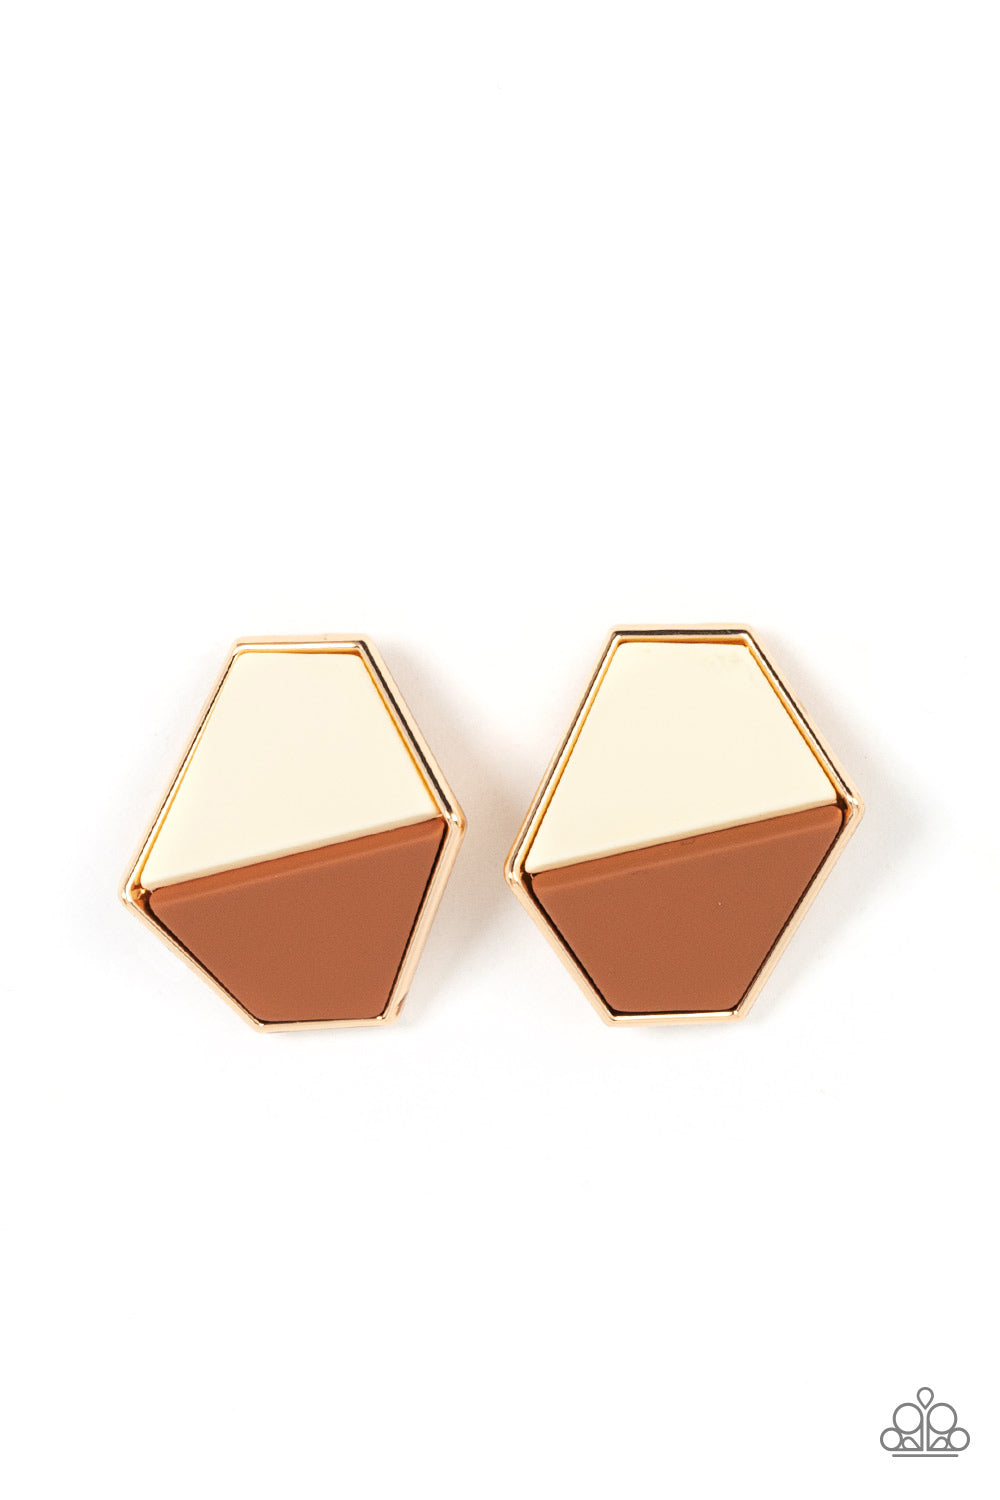 Paparazzi Accessories - Generically Geometric - Brown Earrings featuring a matte finish, white and brown trapezoidal frames are encased in a glistening gold frame that gently folds backwards for added dimension. Earring attaches to a standard post fitting.  Sold as one pair of post earrings.